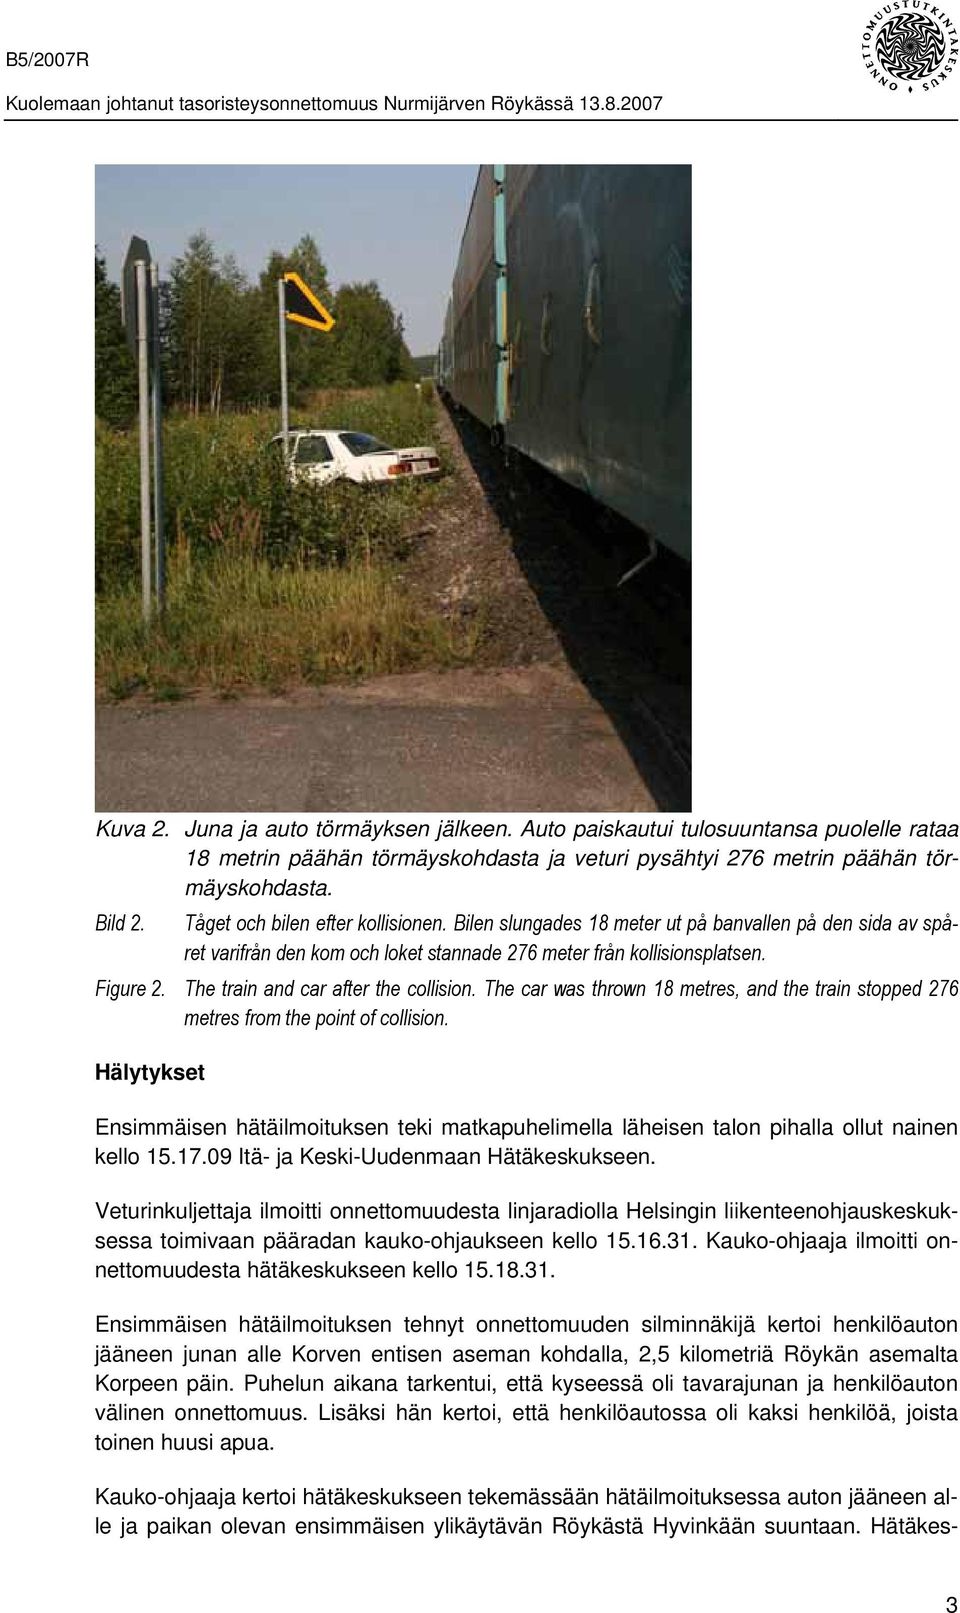 The train and car after the collision. The car was thrown 18 metres, and the train stopped 276 metres from the point of collision.